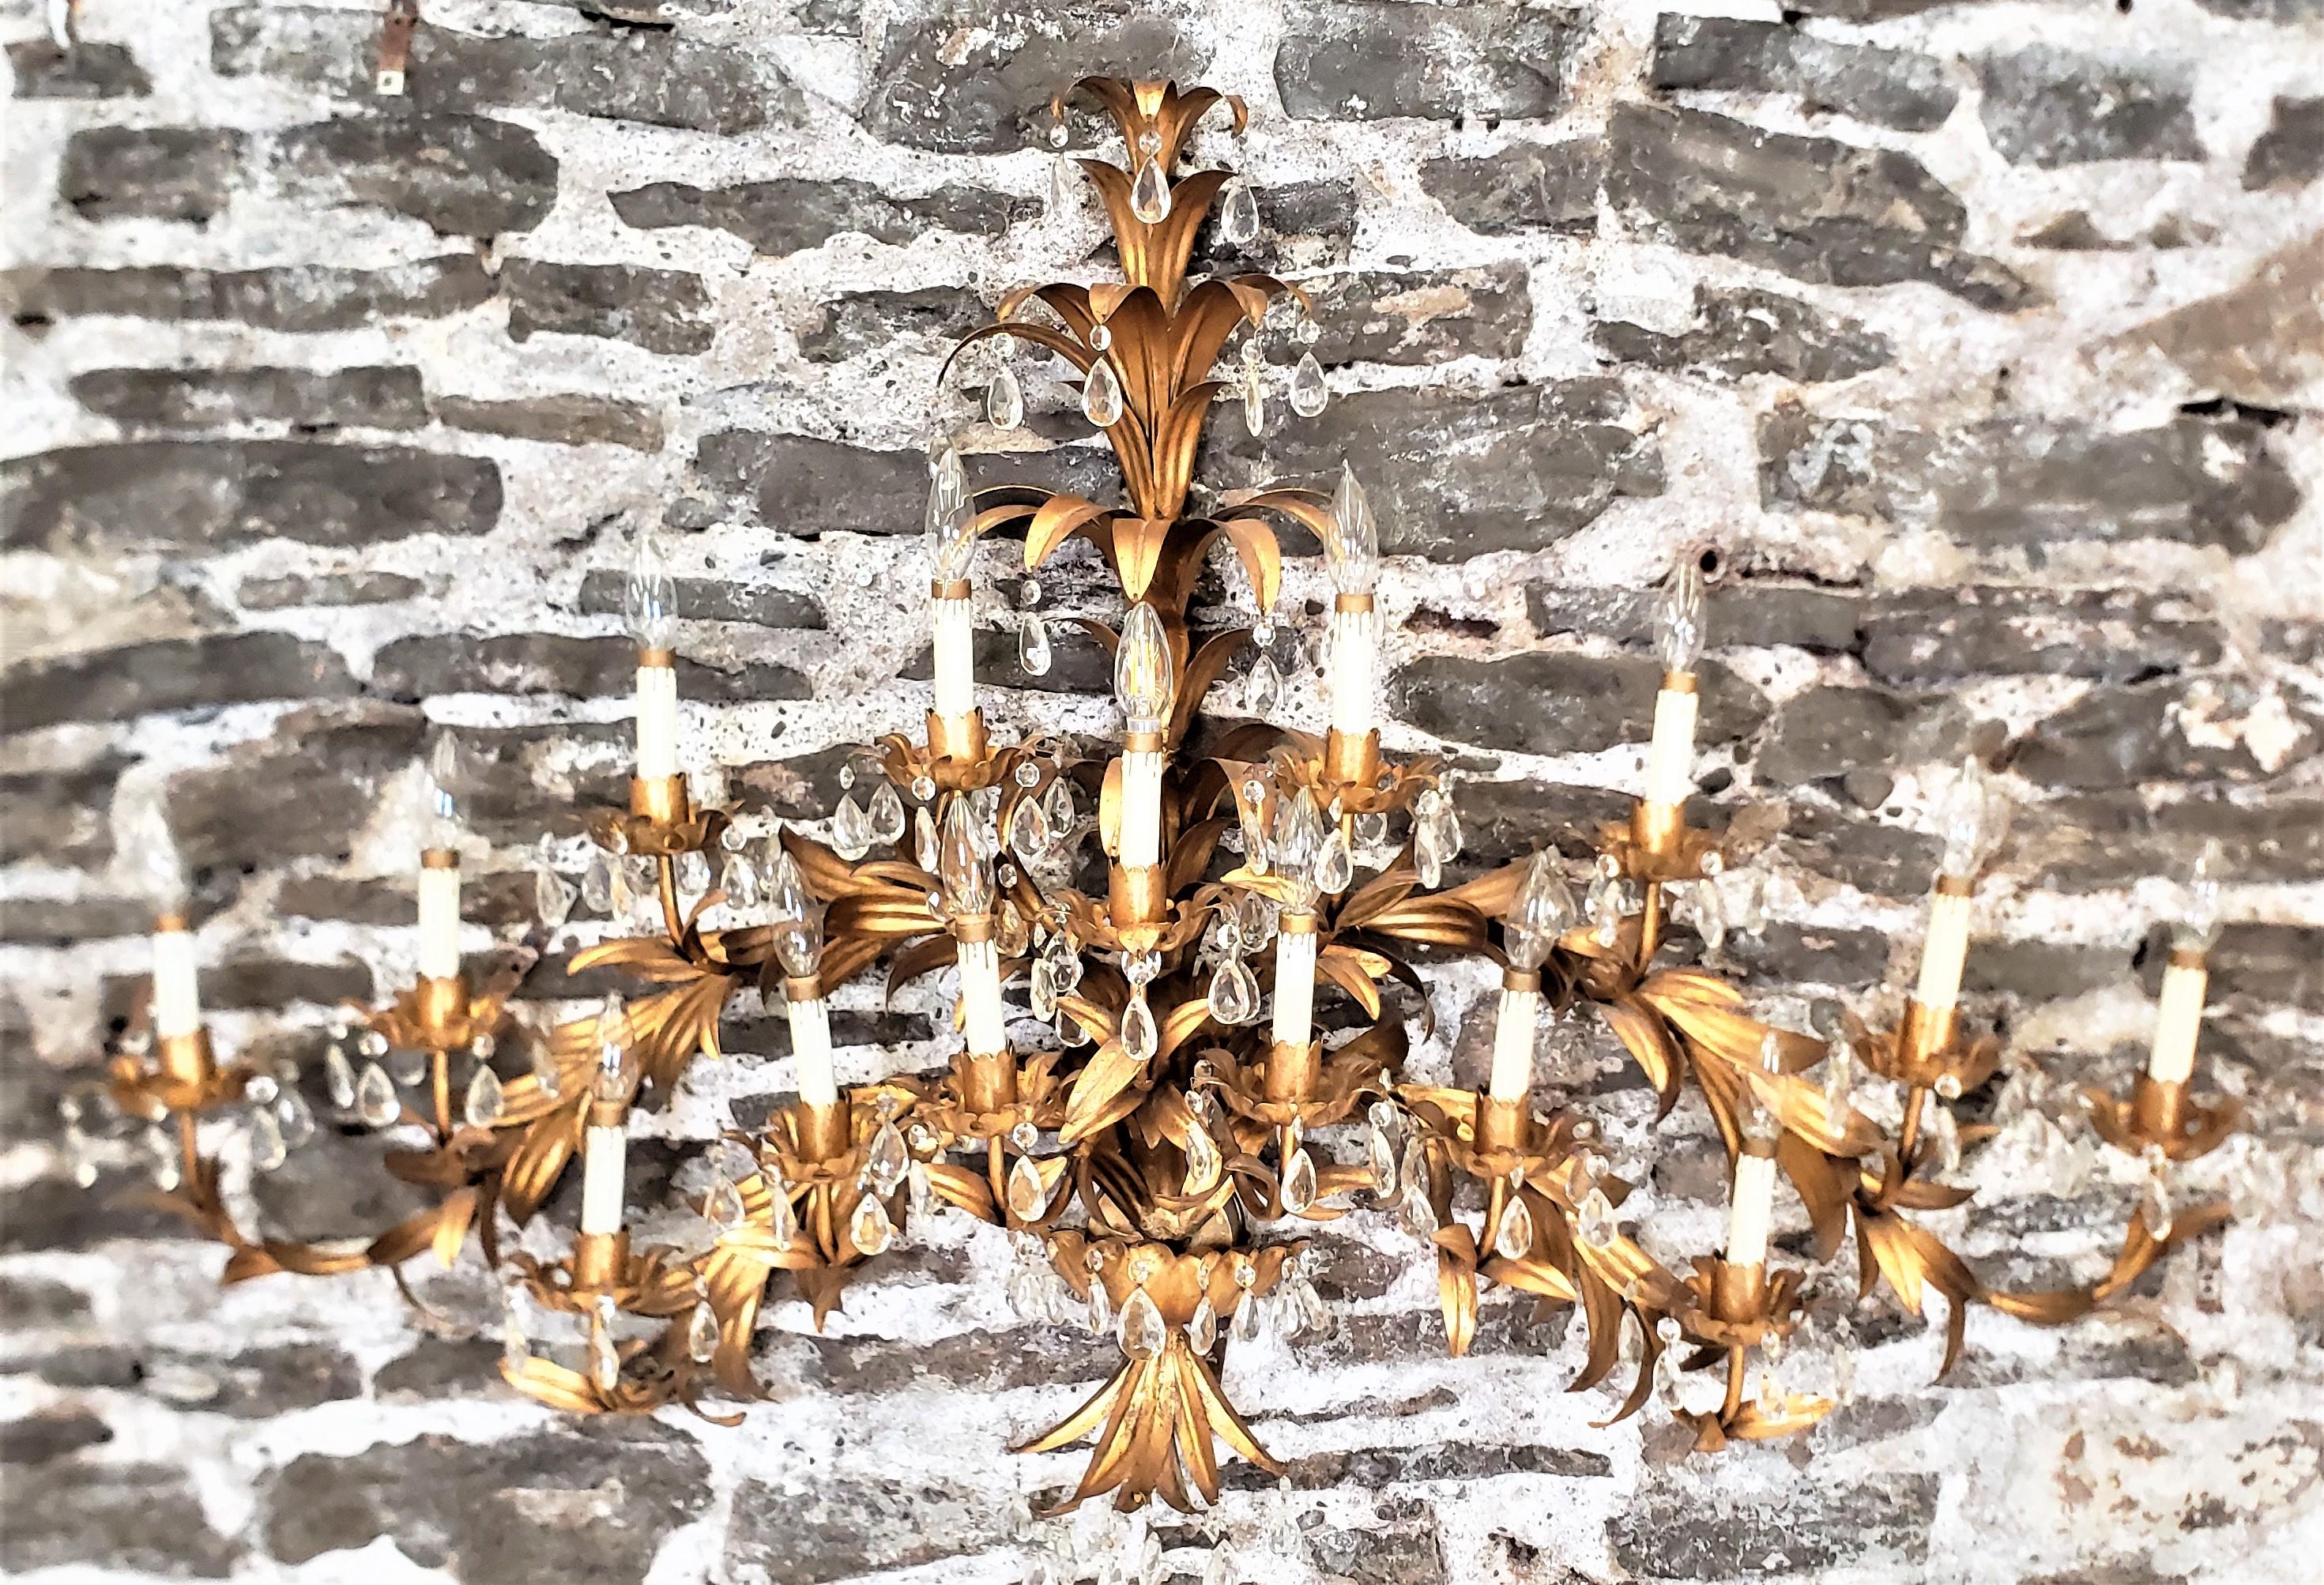 This very large and substantial wall sconce or sculpture has no maker's marks, but did originate from Italy and dates to approximately 1965 and done in a Hollywood Regency style. The sconce is composed of metal with a gilt finish that has been